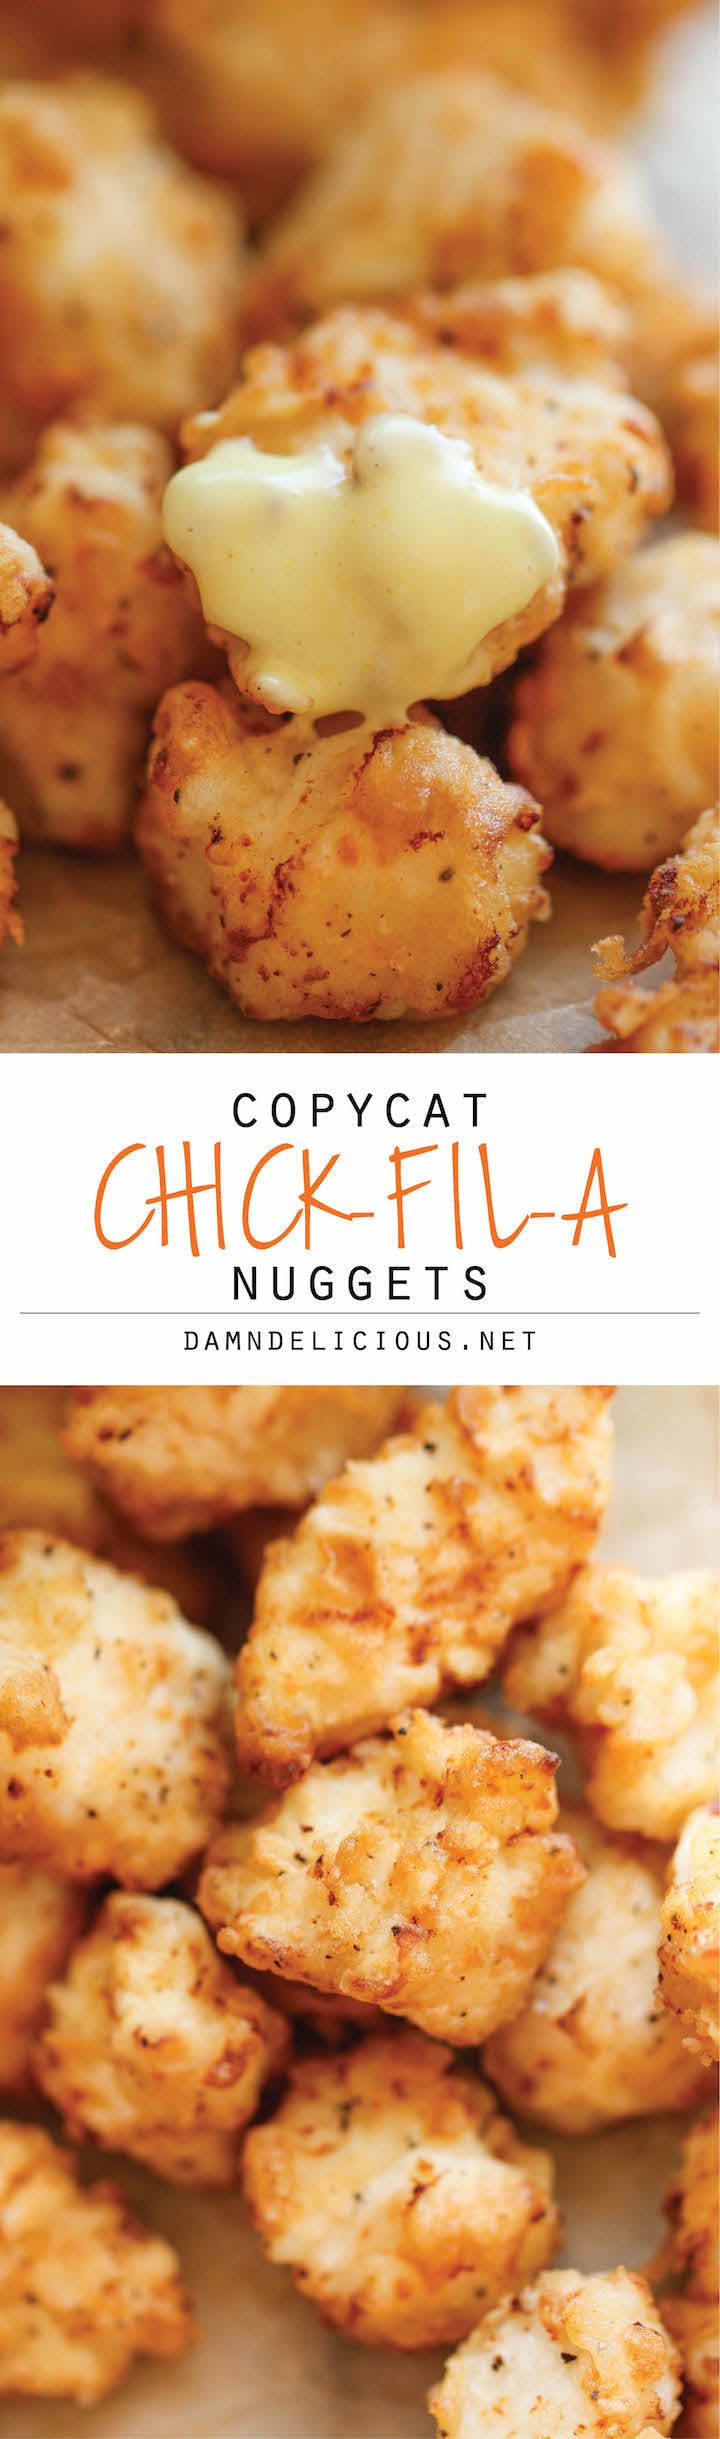 Copycat Chick-fil-A Nuggets - Just like Chick-Fil-A, but it tastes 10000x better! And the homemade honey mustard is out of this world!